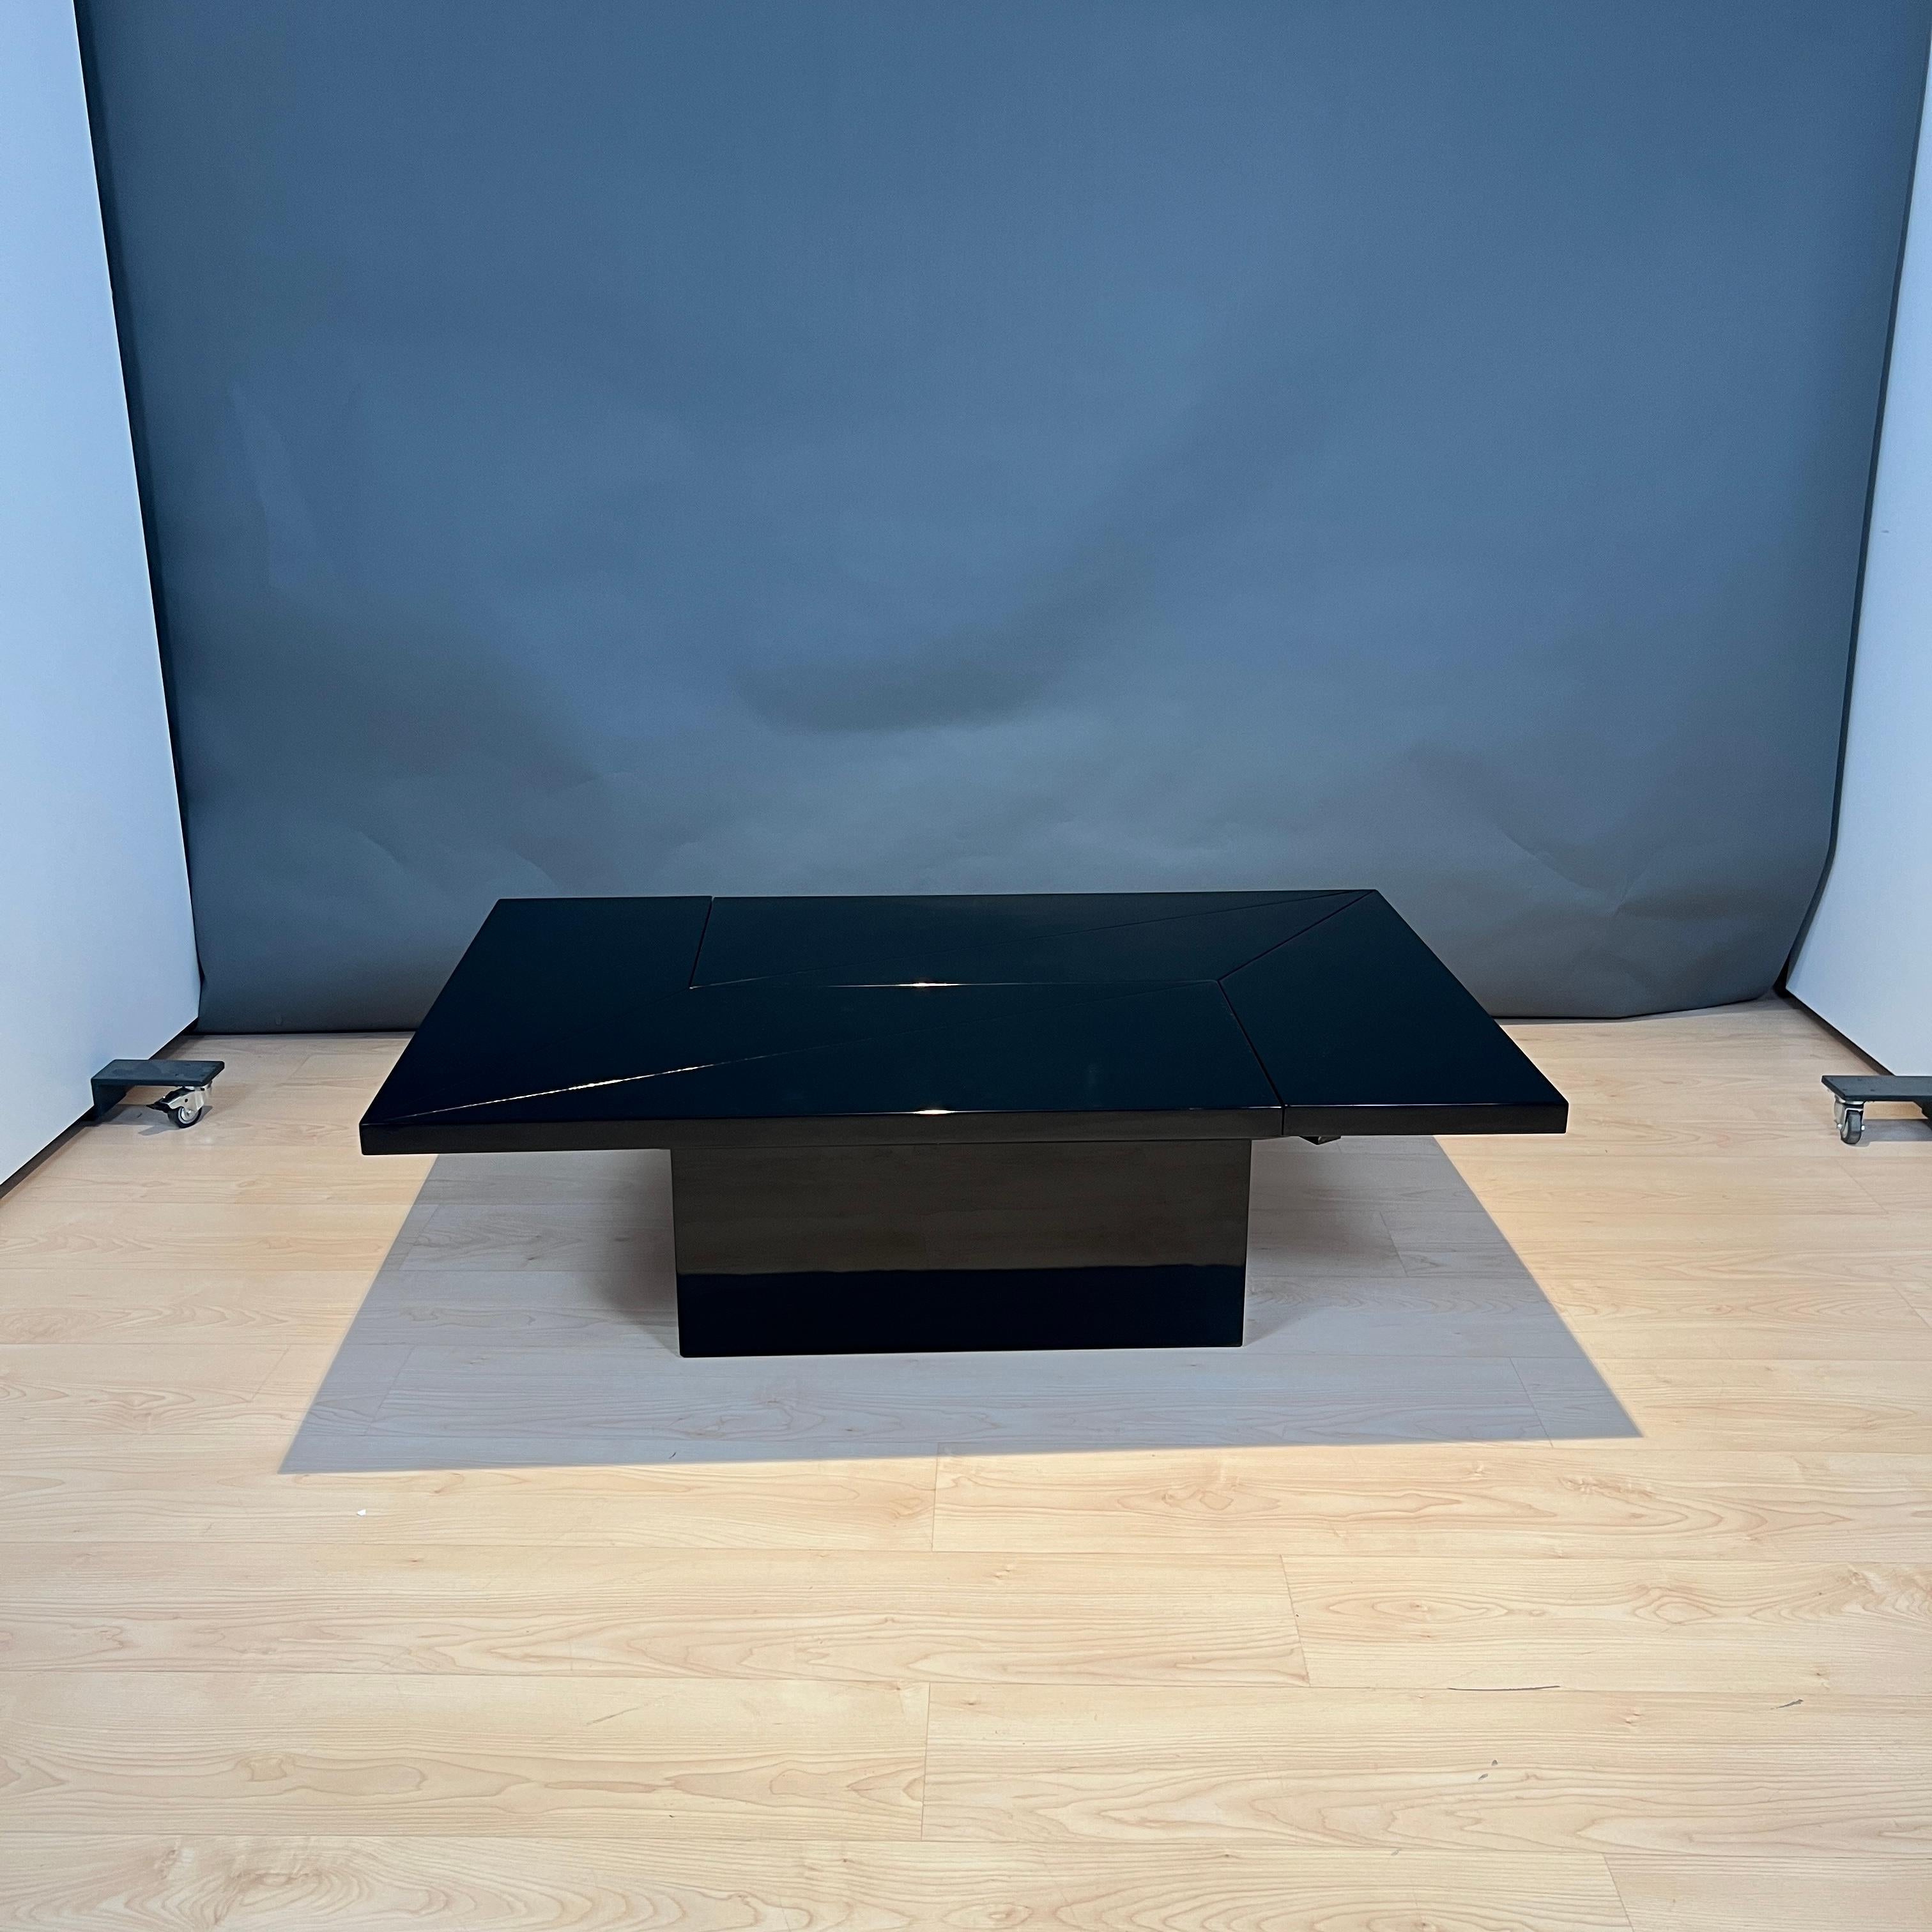 Extraordinary convertible french designer sofa table or coffee table, circa 1970s.
Design: Paul Michel for Roche Bobois
Black high-gloss piano lacquer on wood. The tops are connected by a high quality sliding mechanism, allowing the mirrored center